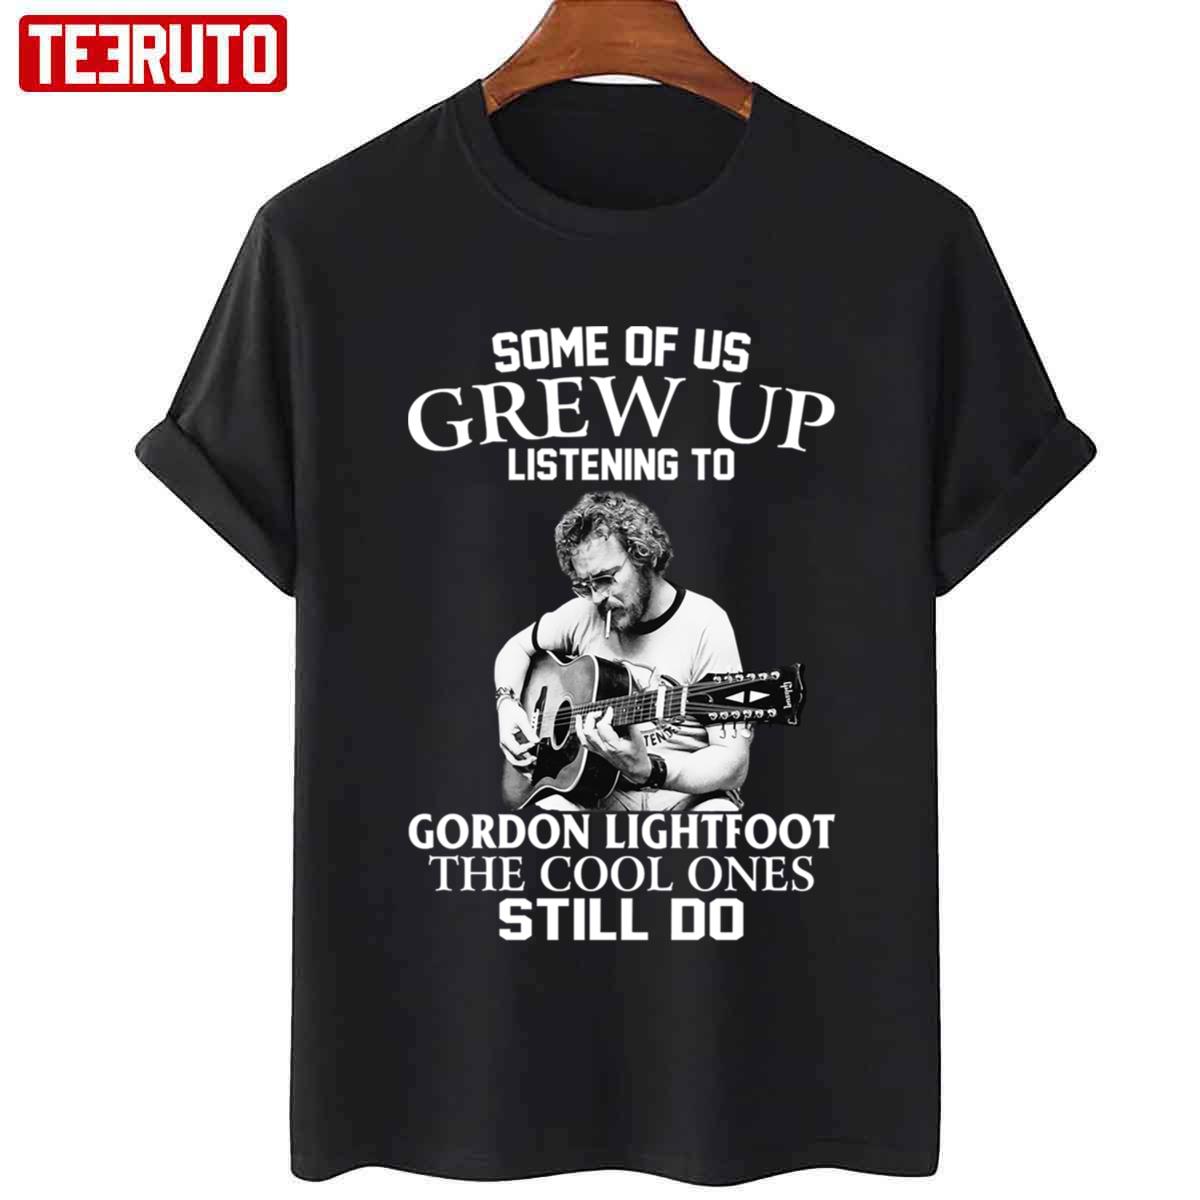 More Then Awesome Some Of Us Grew Up Lightfoot The Cool Ones Still Do Graphic Unisex Sweatshirt